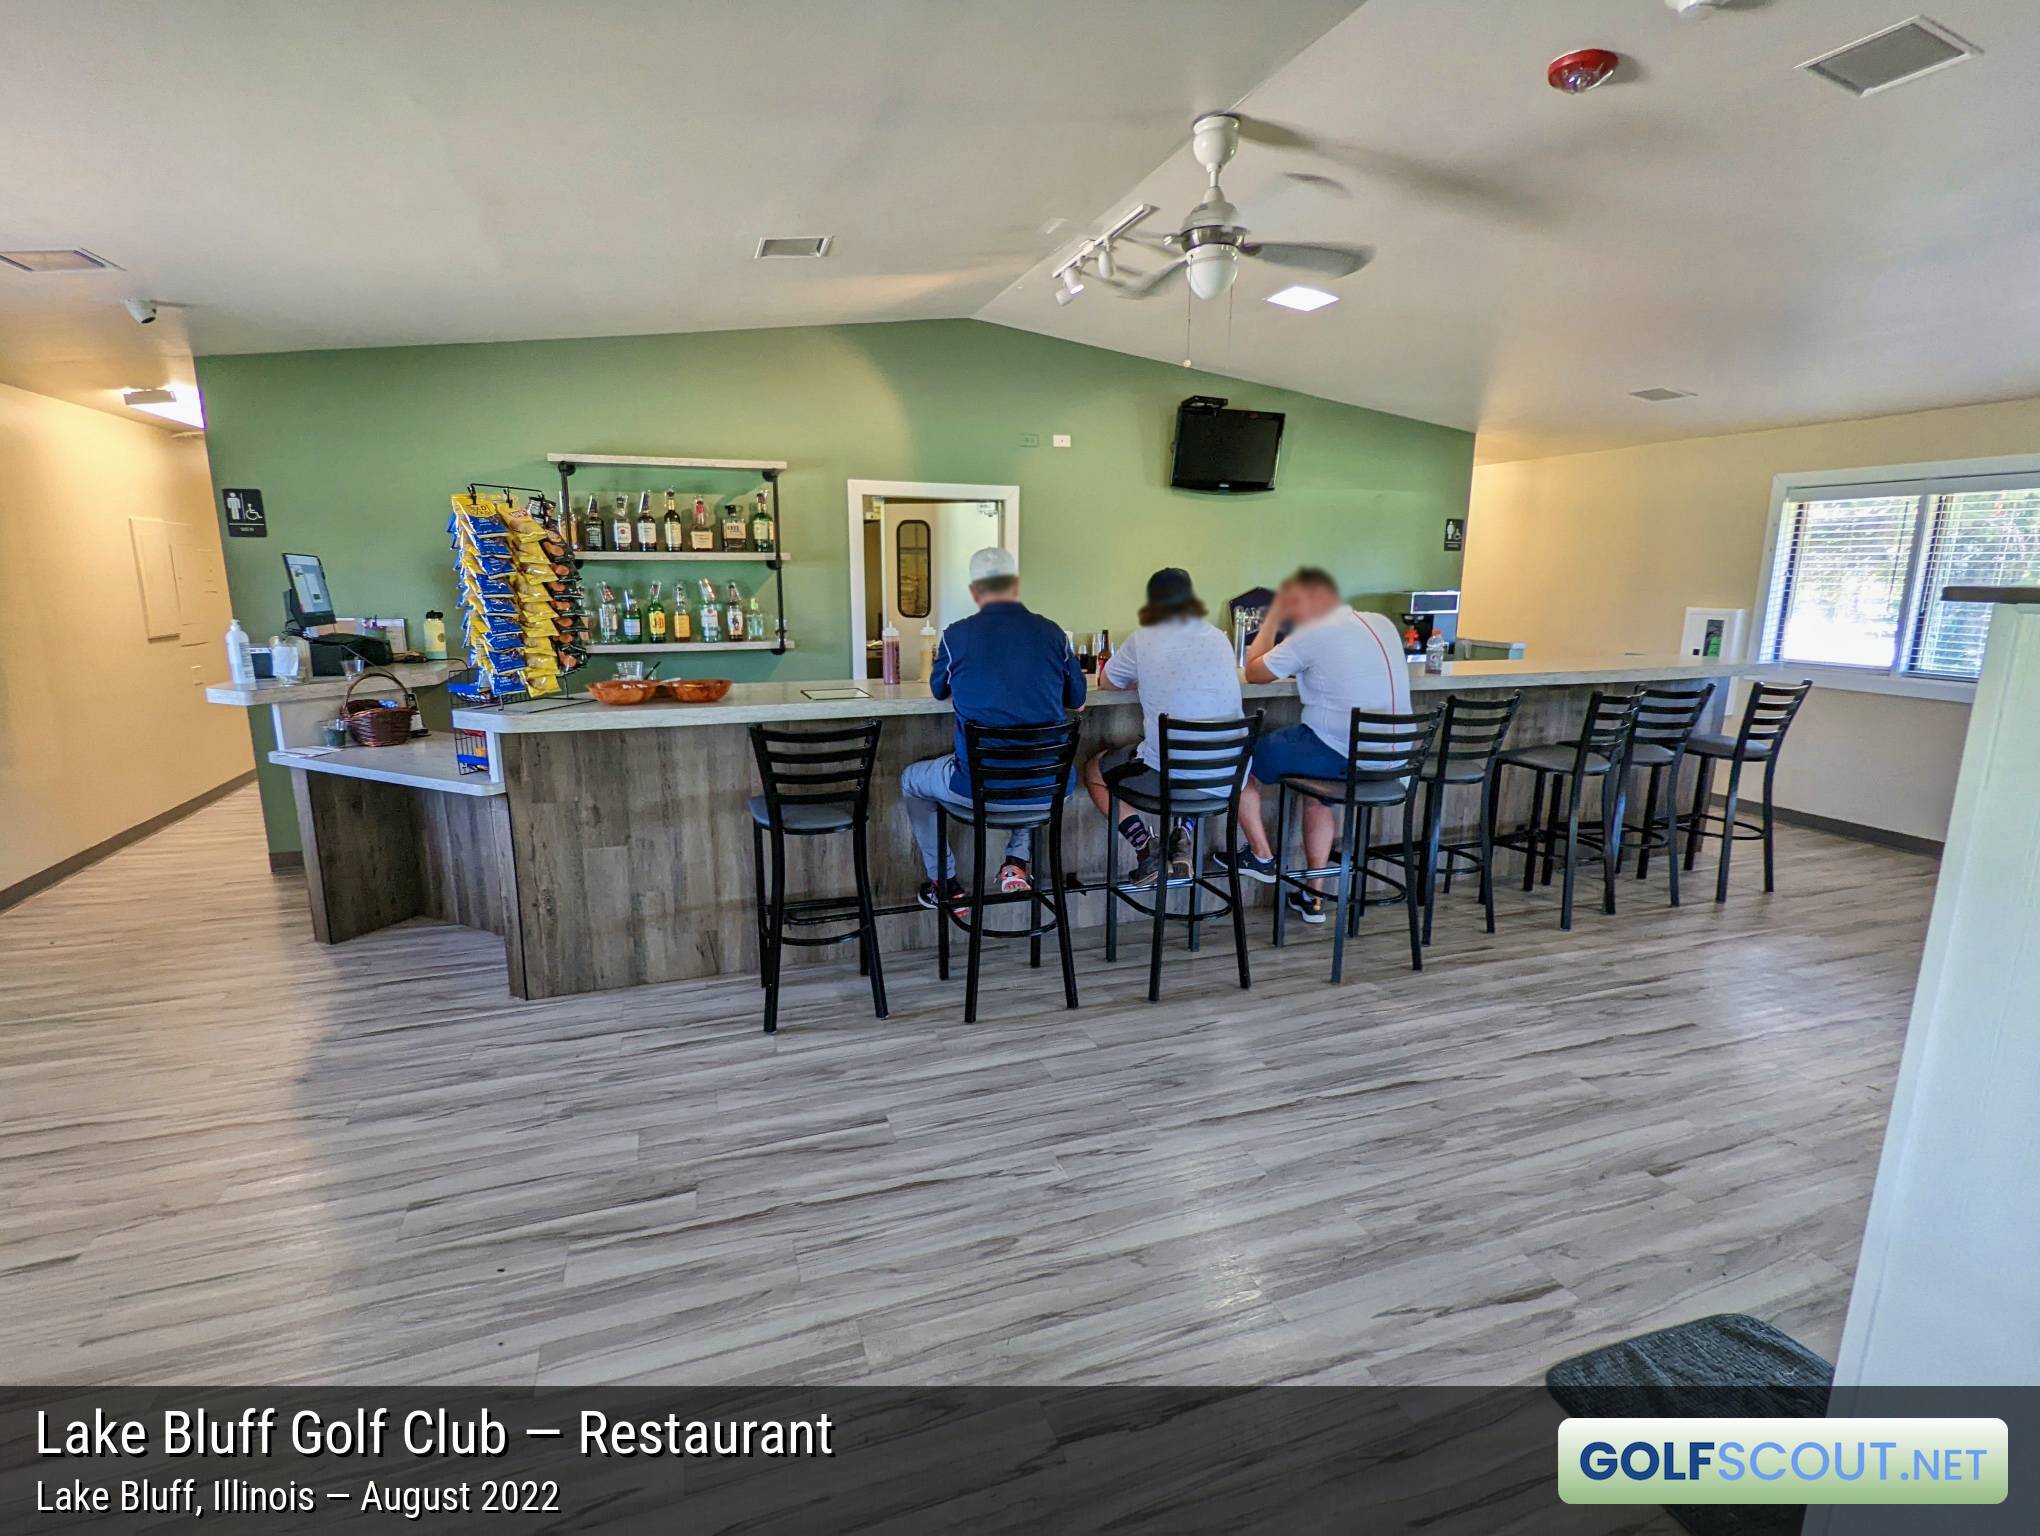 Photo of the restaurant at Lake Bluff Golf Club in Lake Bluff, Illinois. 